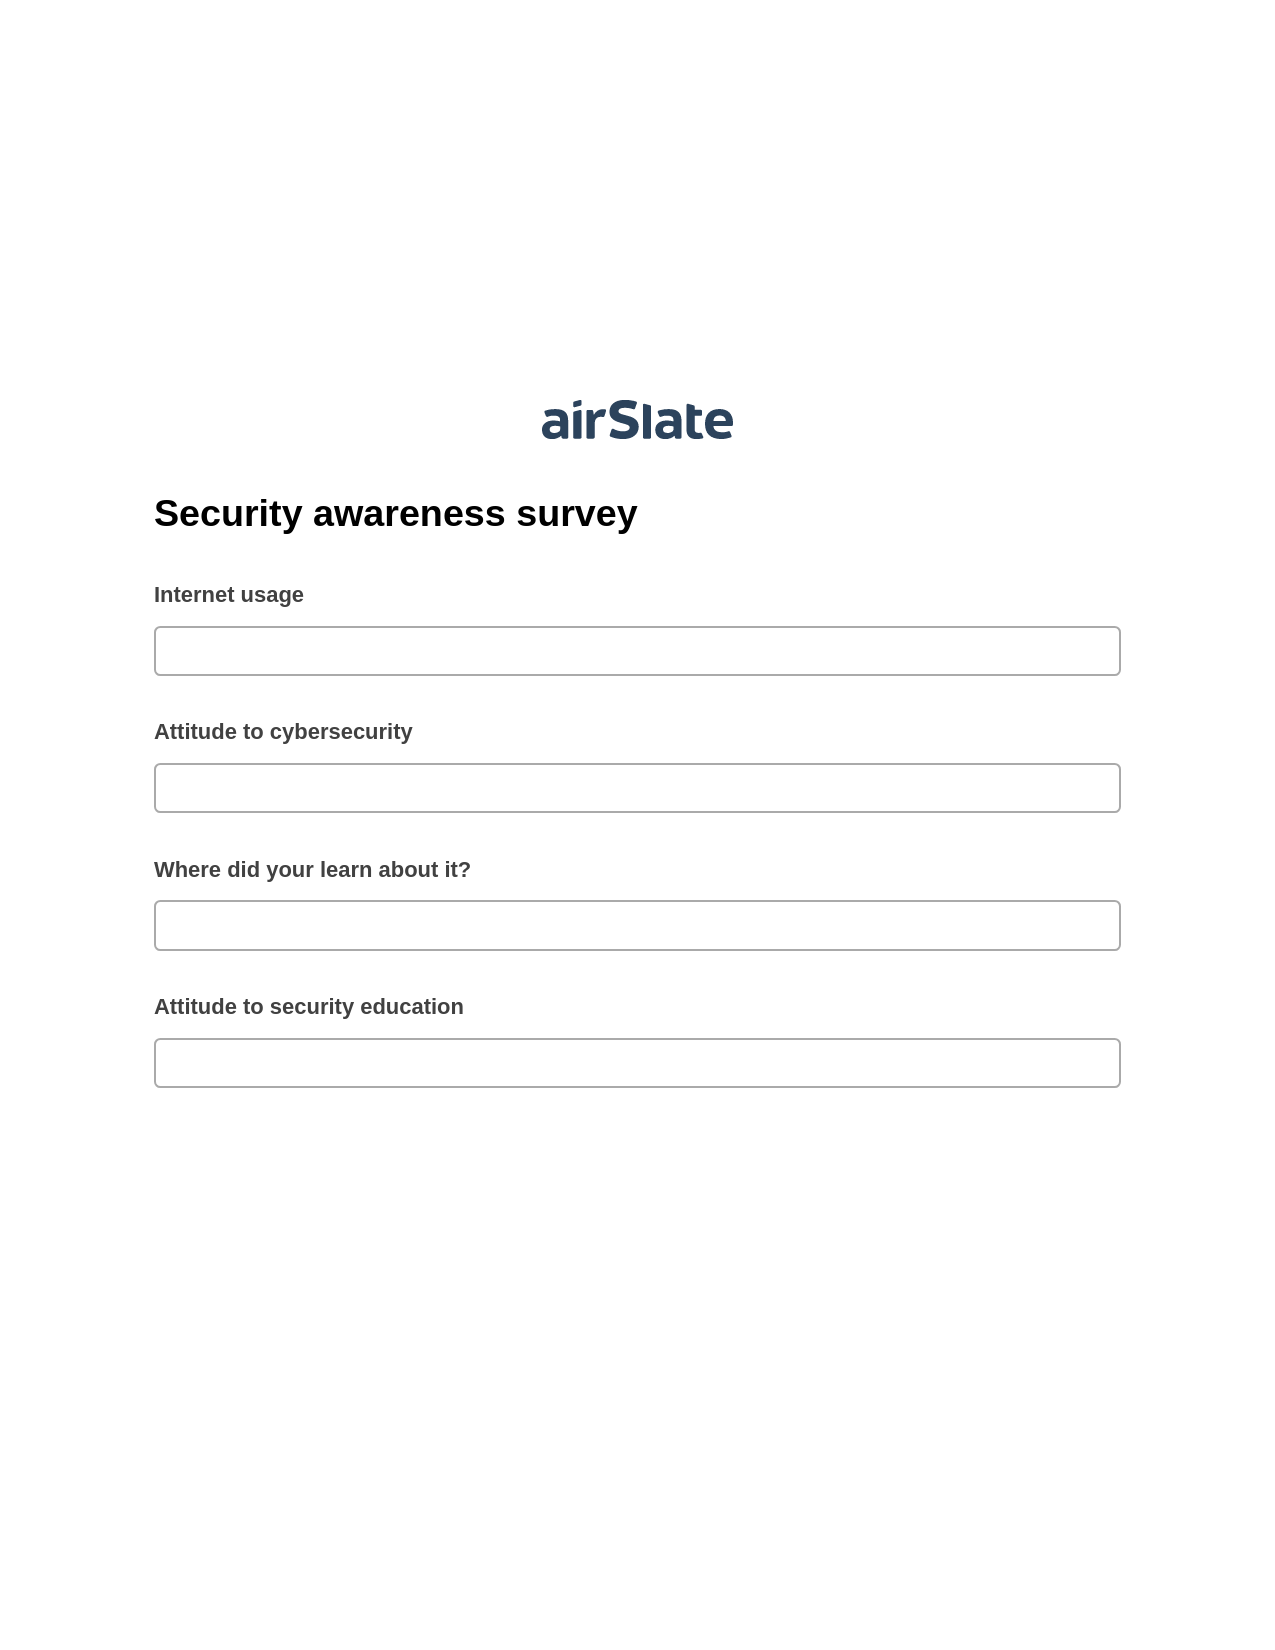 Security awareness survey Pre-fill from NetSuite Records Bot, Create Slate from another Flow Bot, Export to Excel 365 Bot